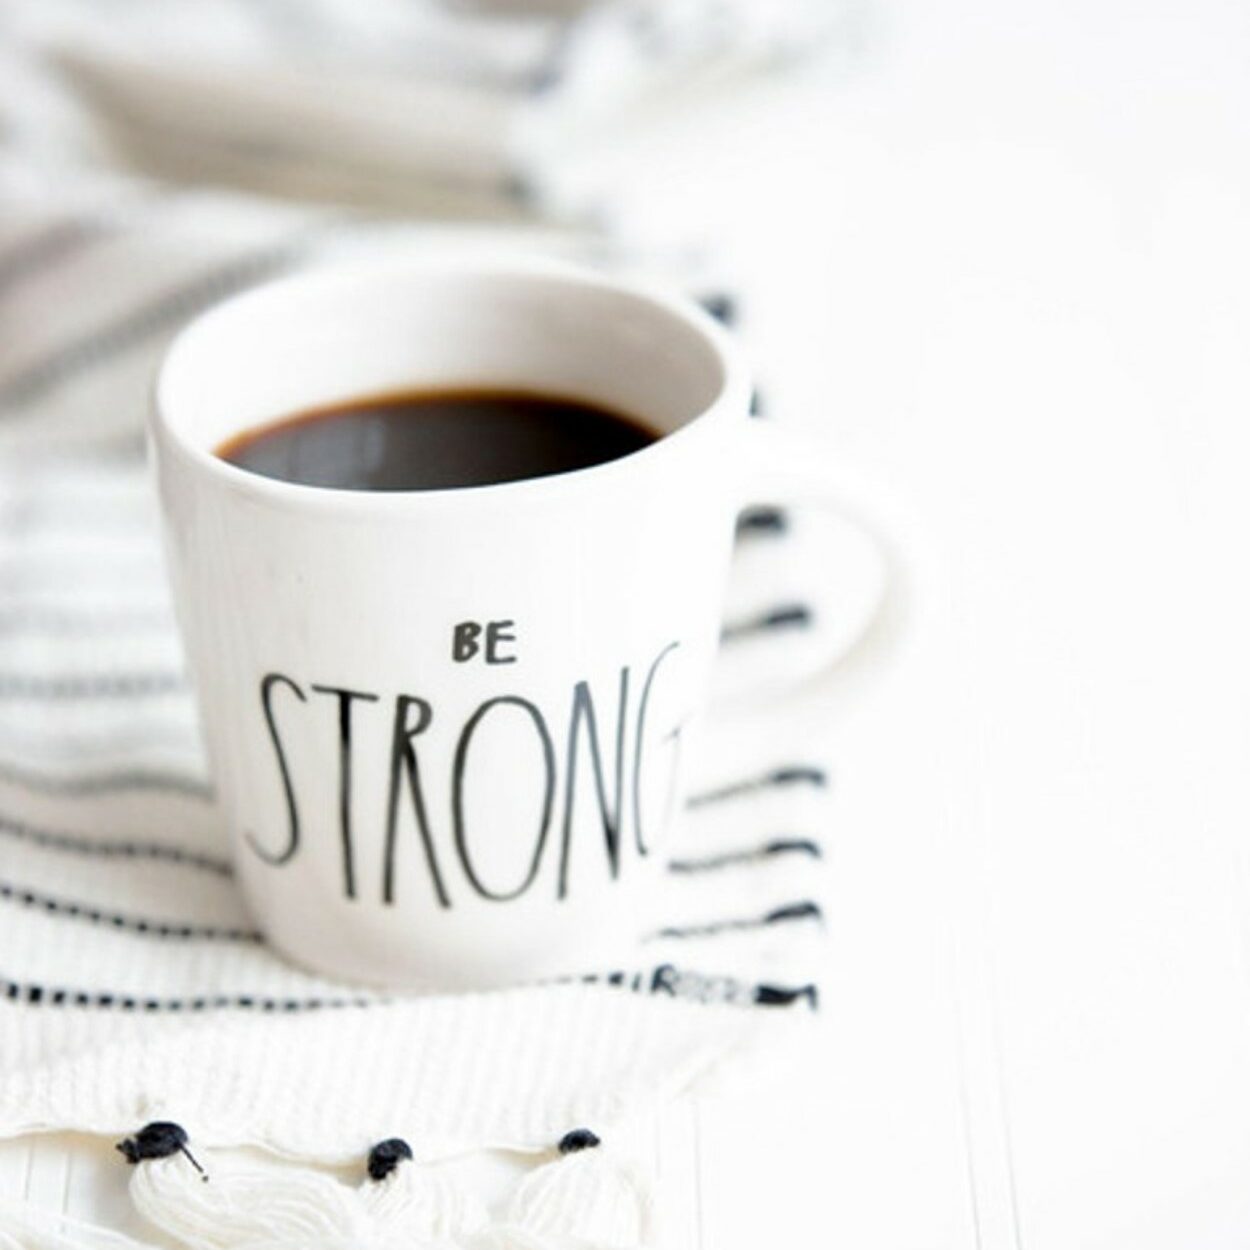 Be strong and enjoy decaf coffee